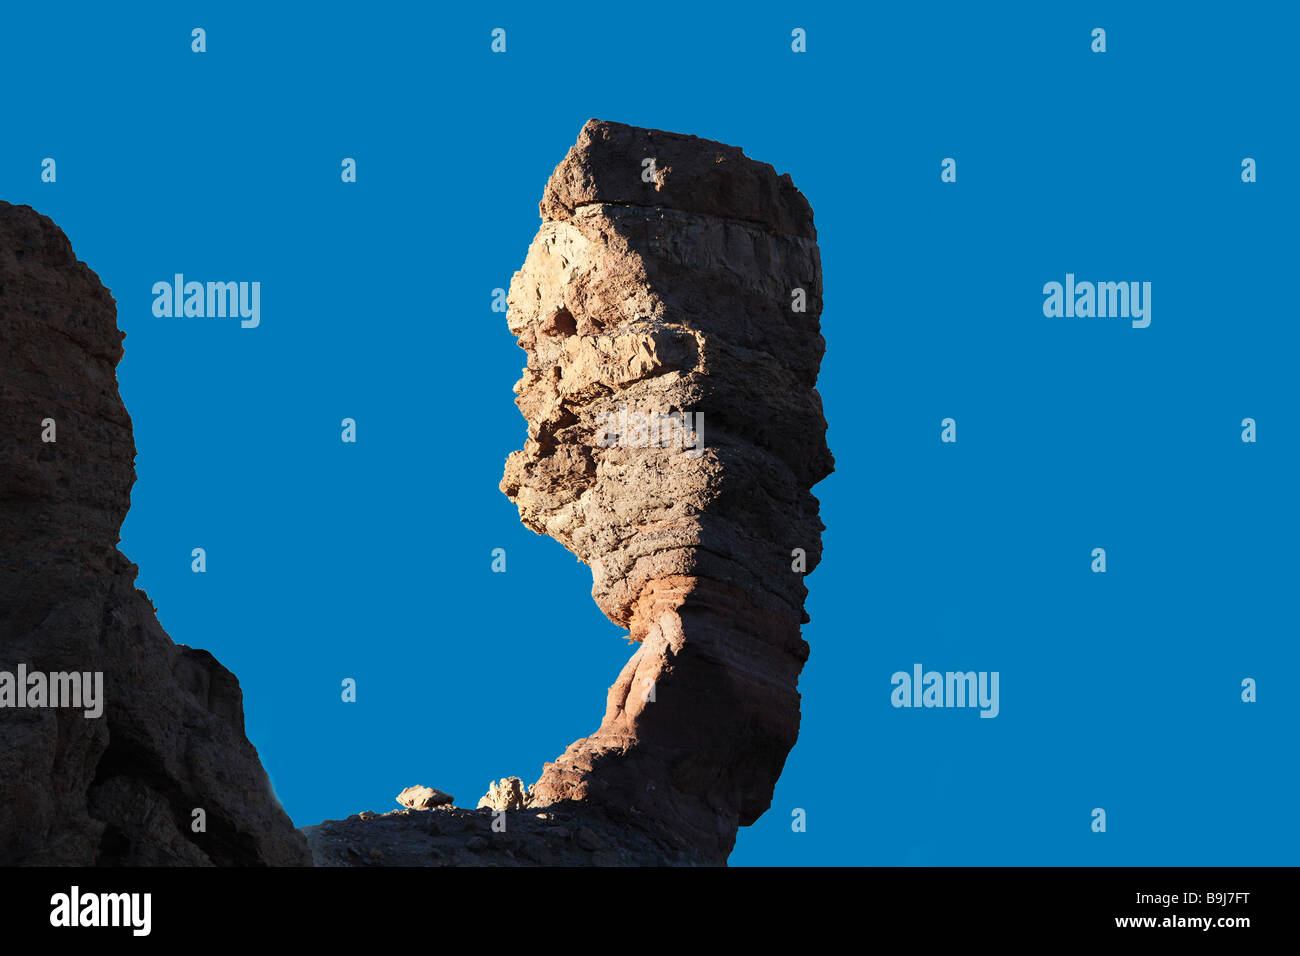 Piece of the rock formation Roques de Garcia, Tenerife, Canary Islands, Spain, Europe Stock Photo